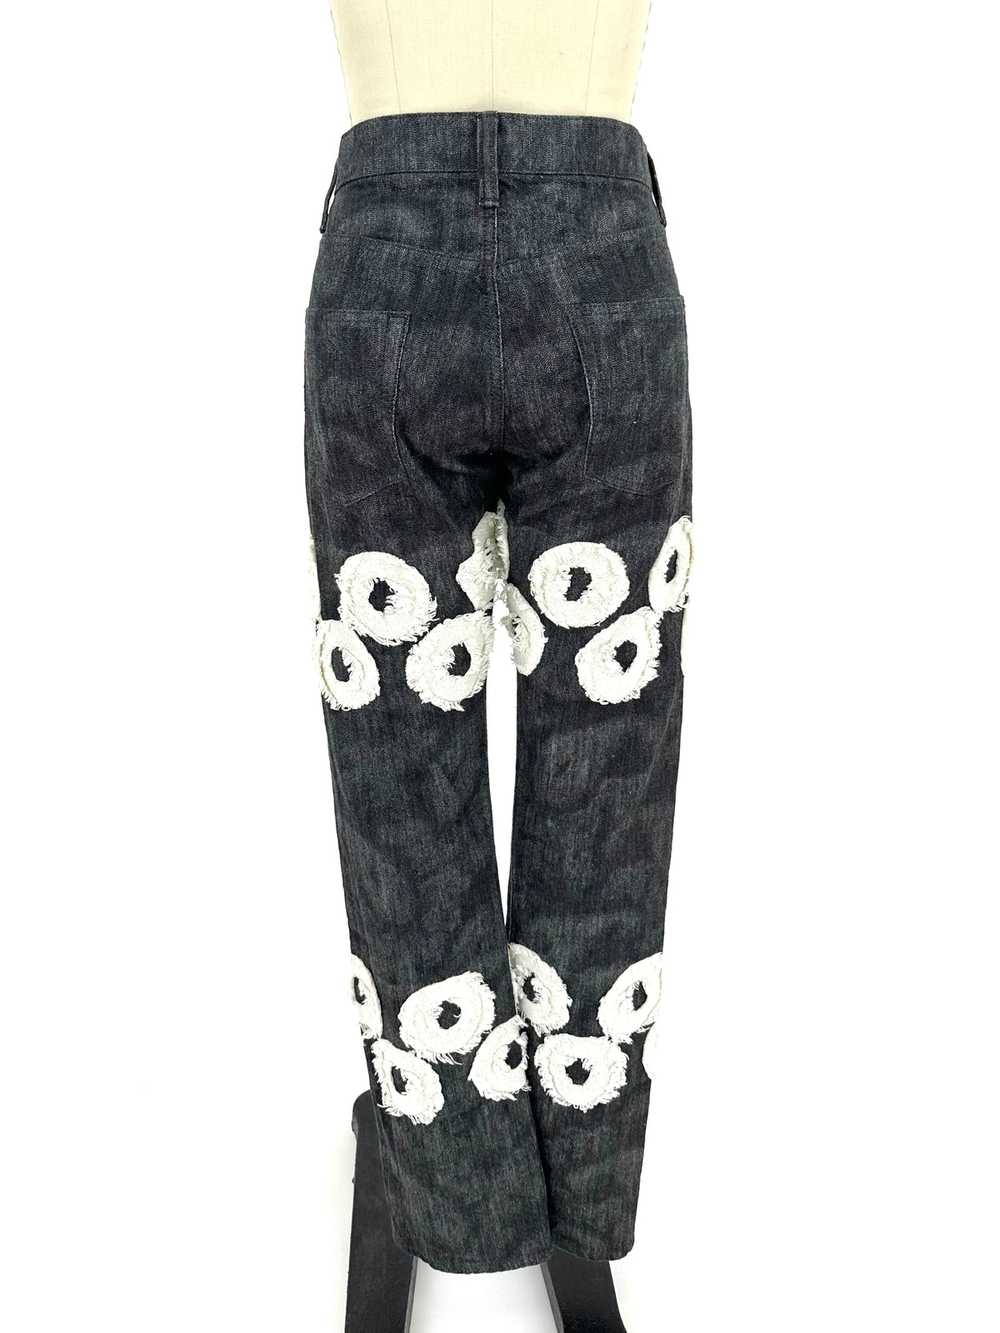 2011 Issey Miyake Archive Embroidered Jeans - image 3